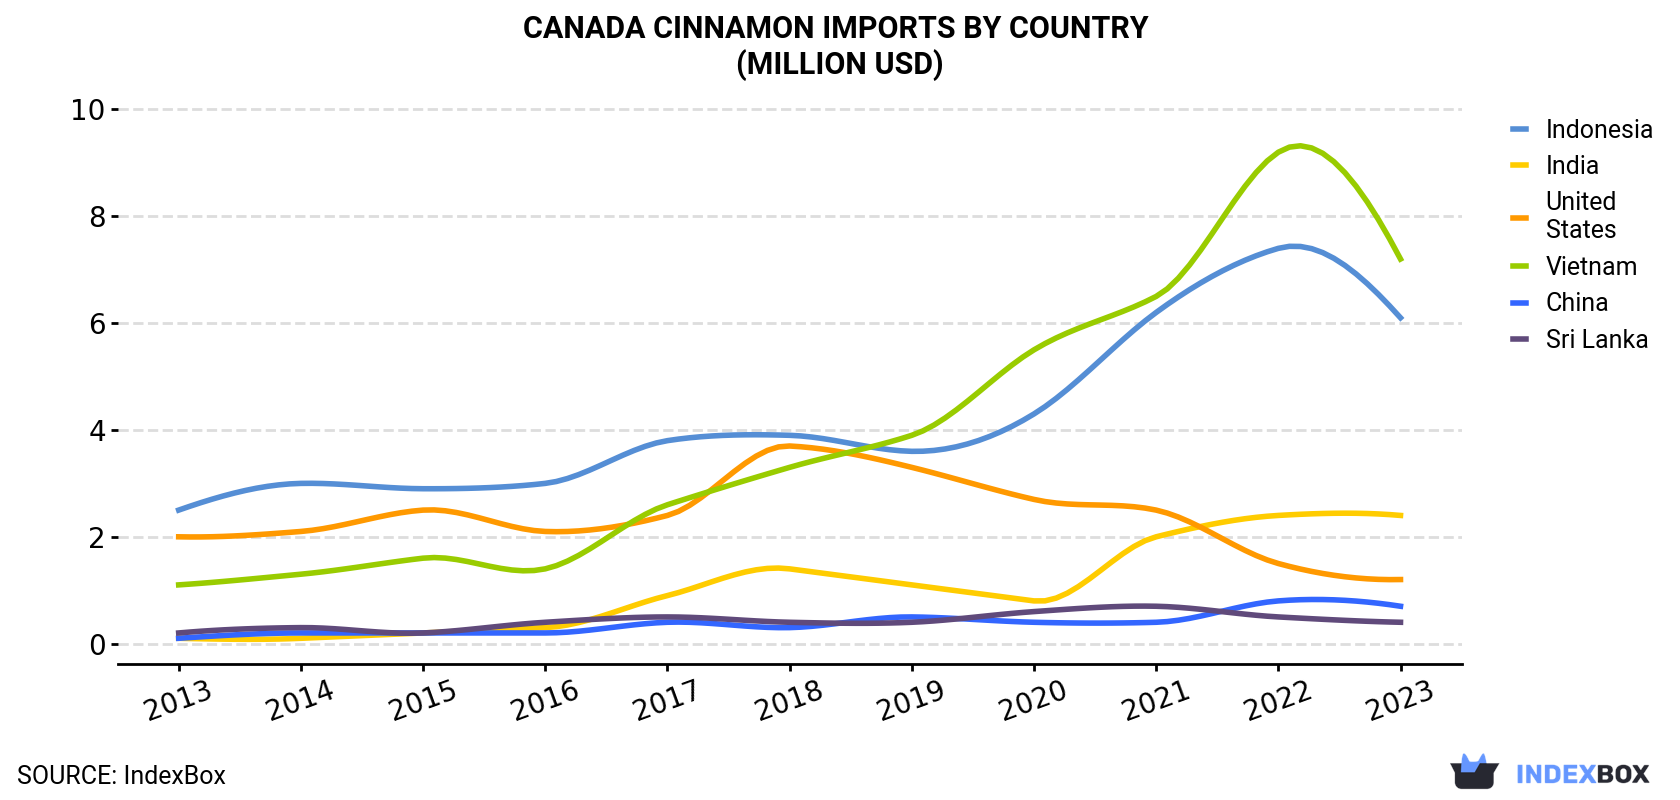 Canada Cinnamon Imports By Country (Million USD)